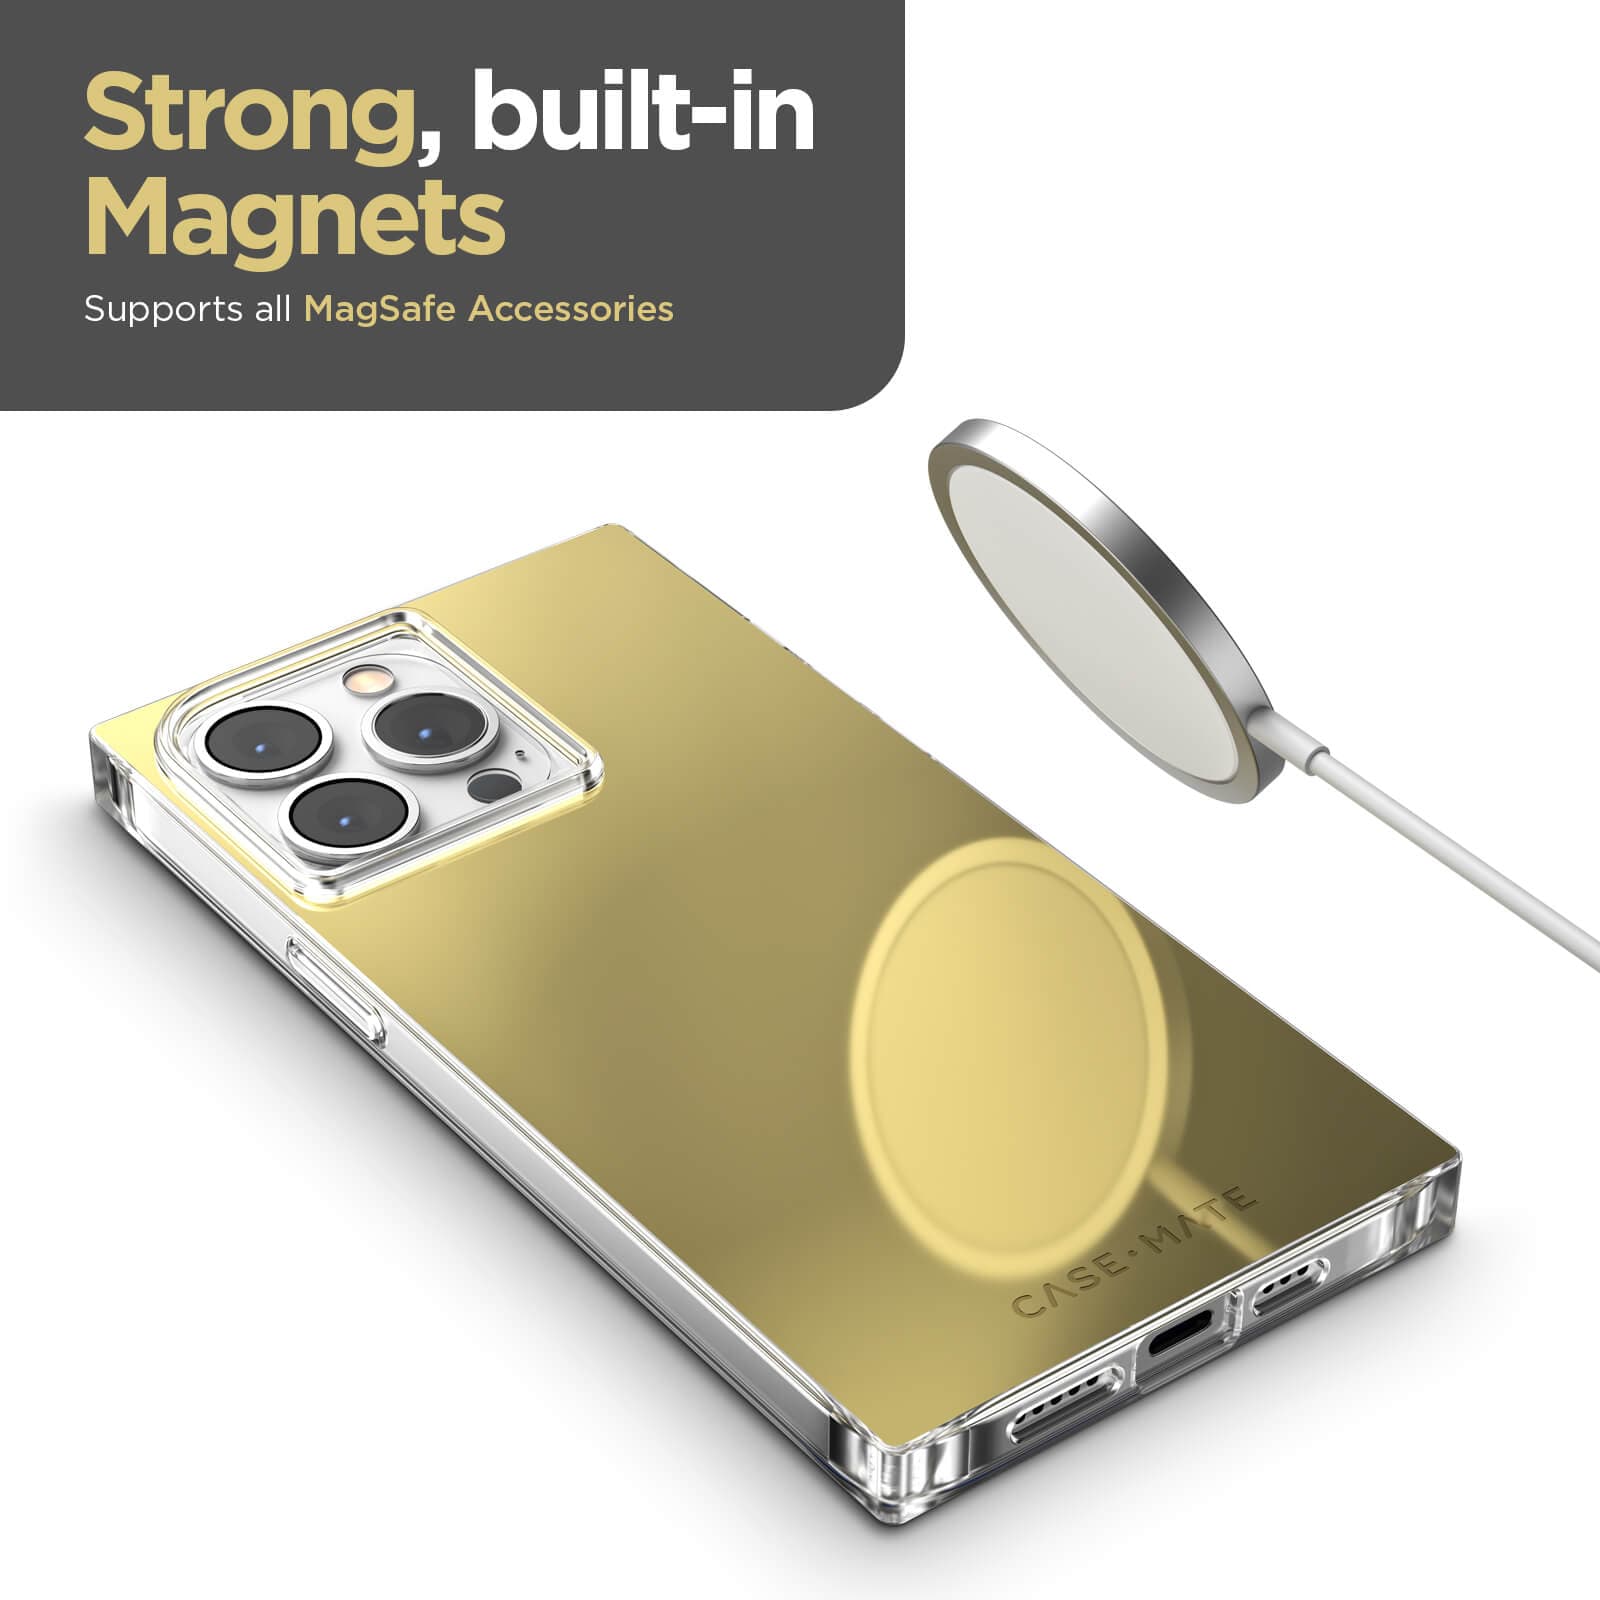 Strong, built-in Magnets. Supports all MagSafe accessories. color::Gold